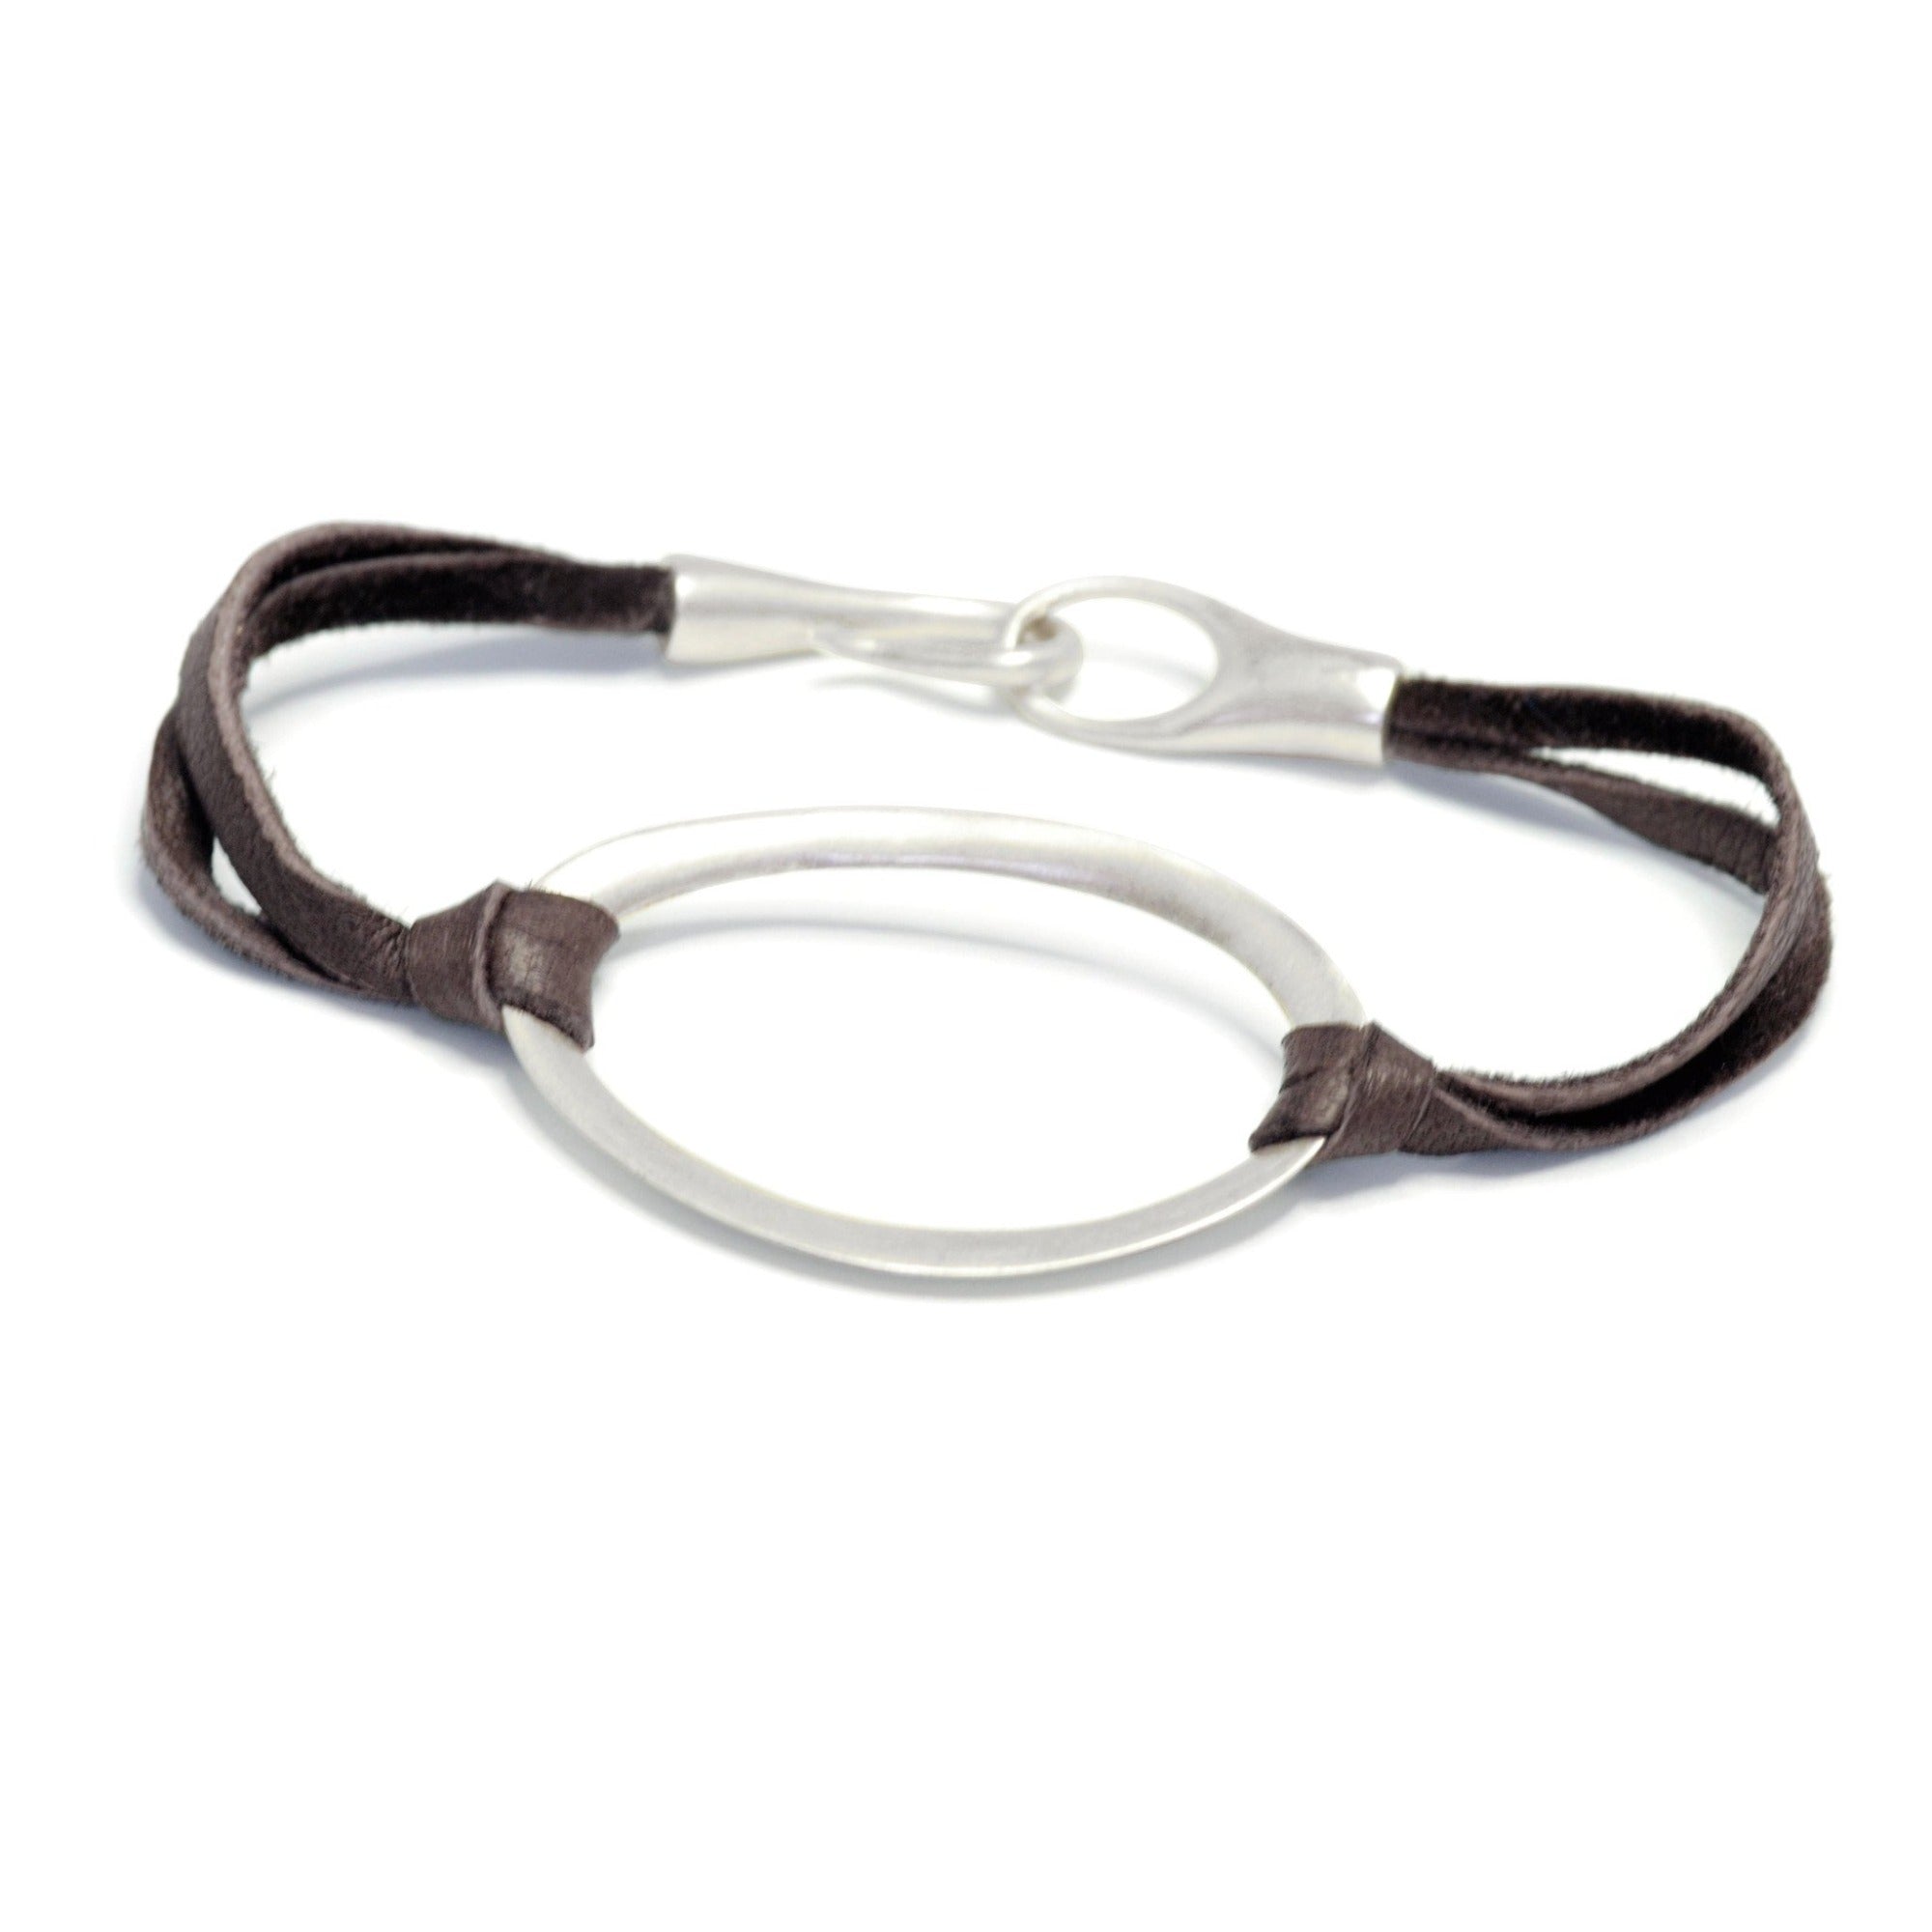 sterling silver on brown leather / S (6") oculus id bracelet